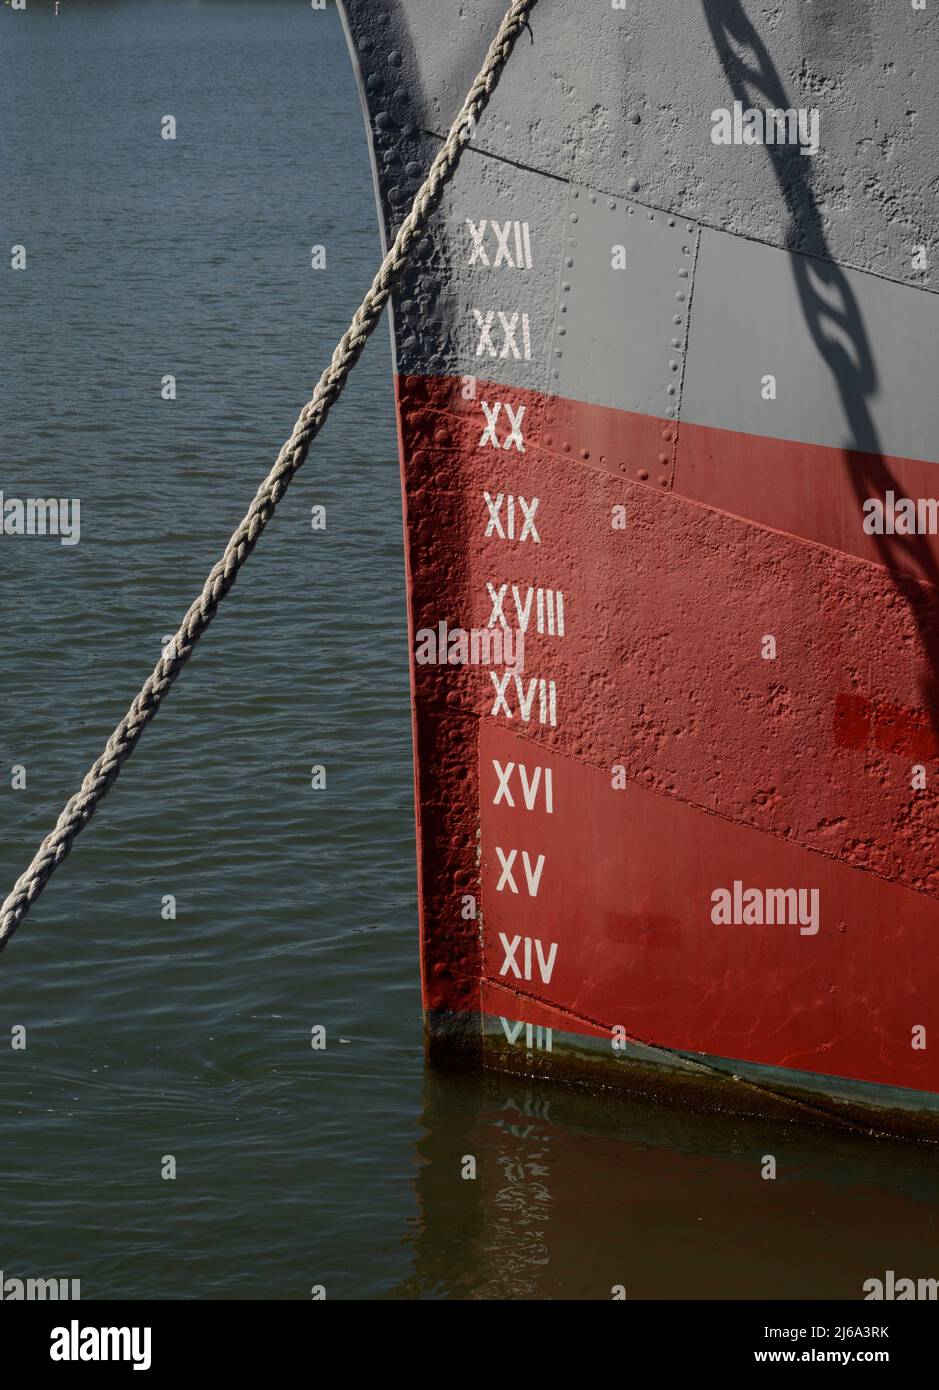 Draft marks on the bow of a ship in San Francisco, California. The marks reveal the distance from the waterline to to the bottom of the ship's hull. Stock Photo